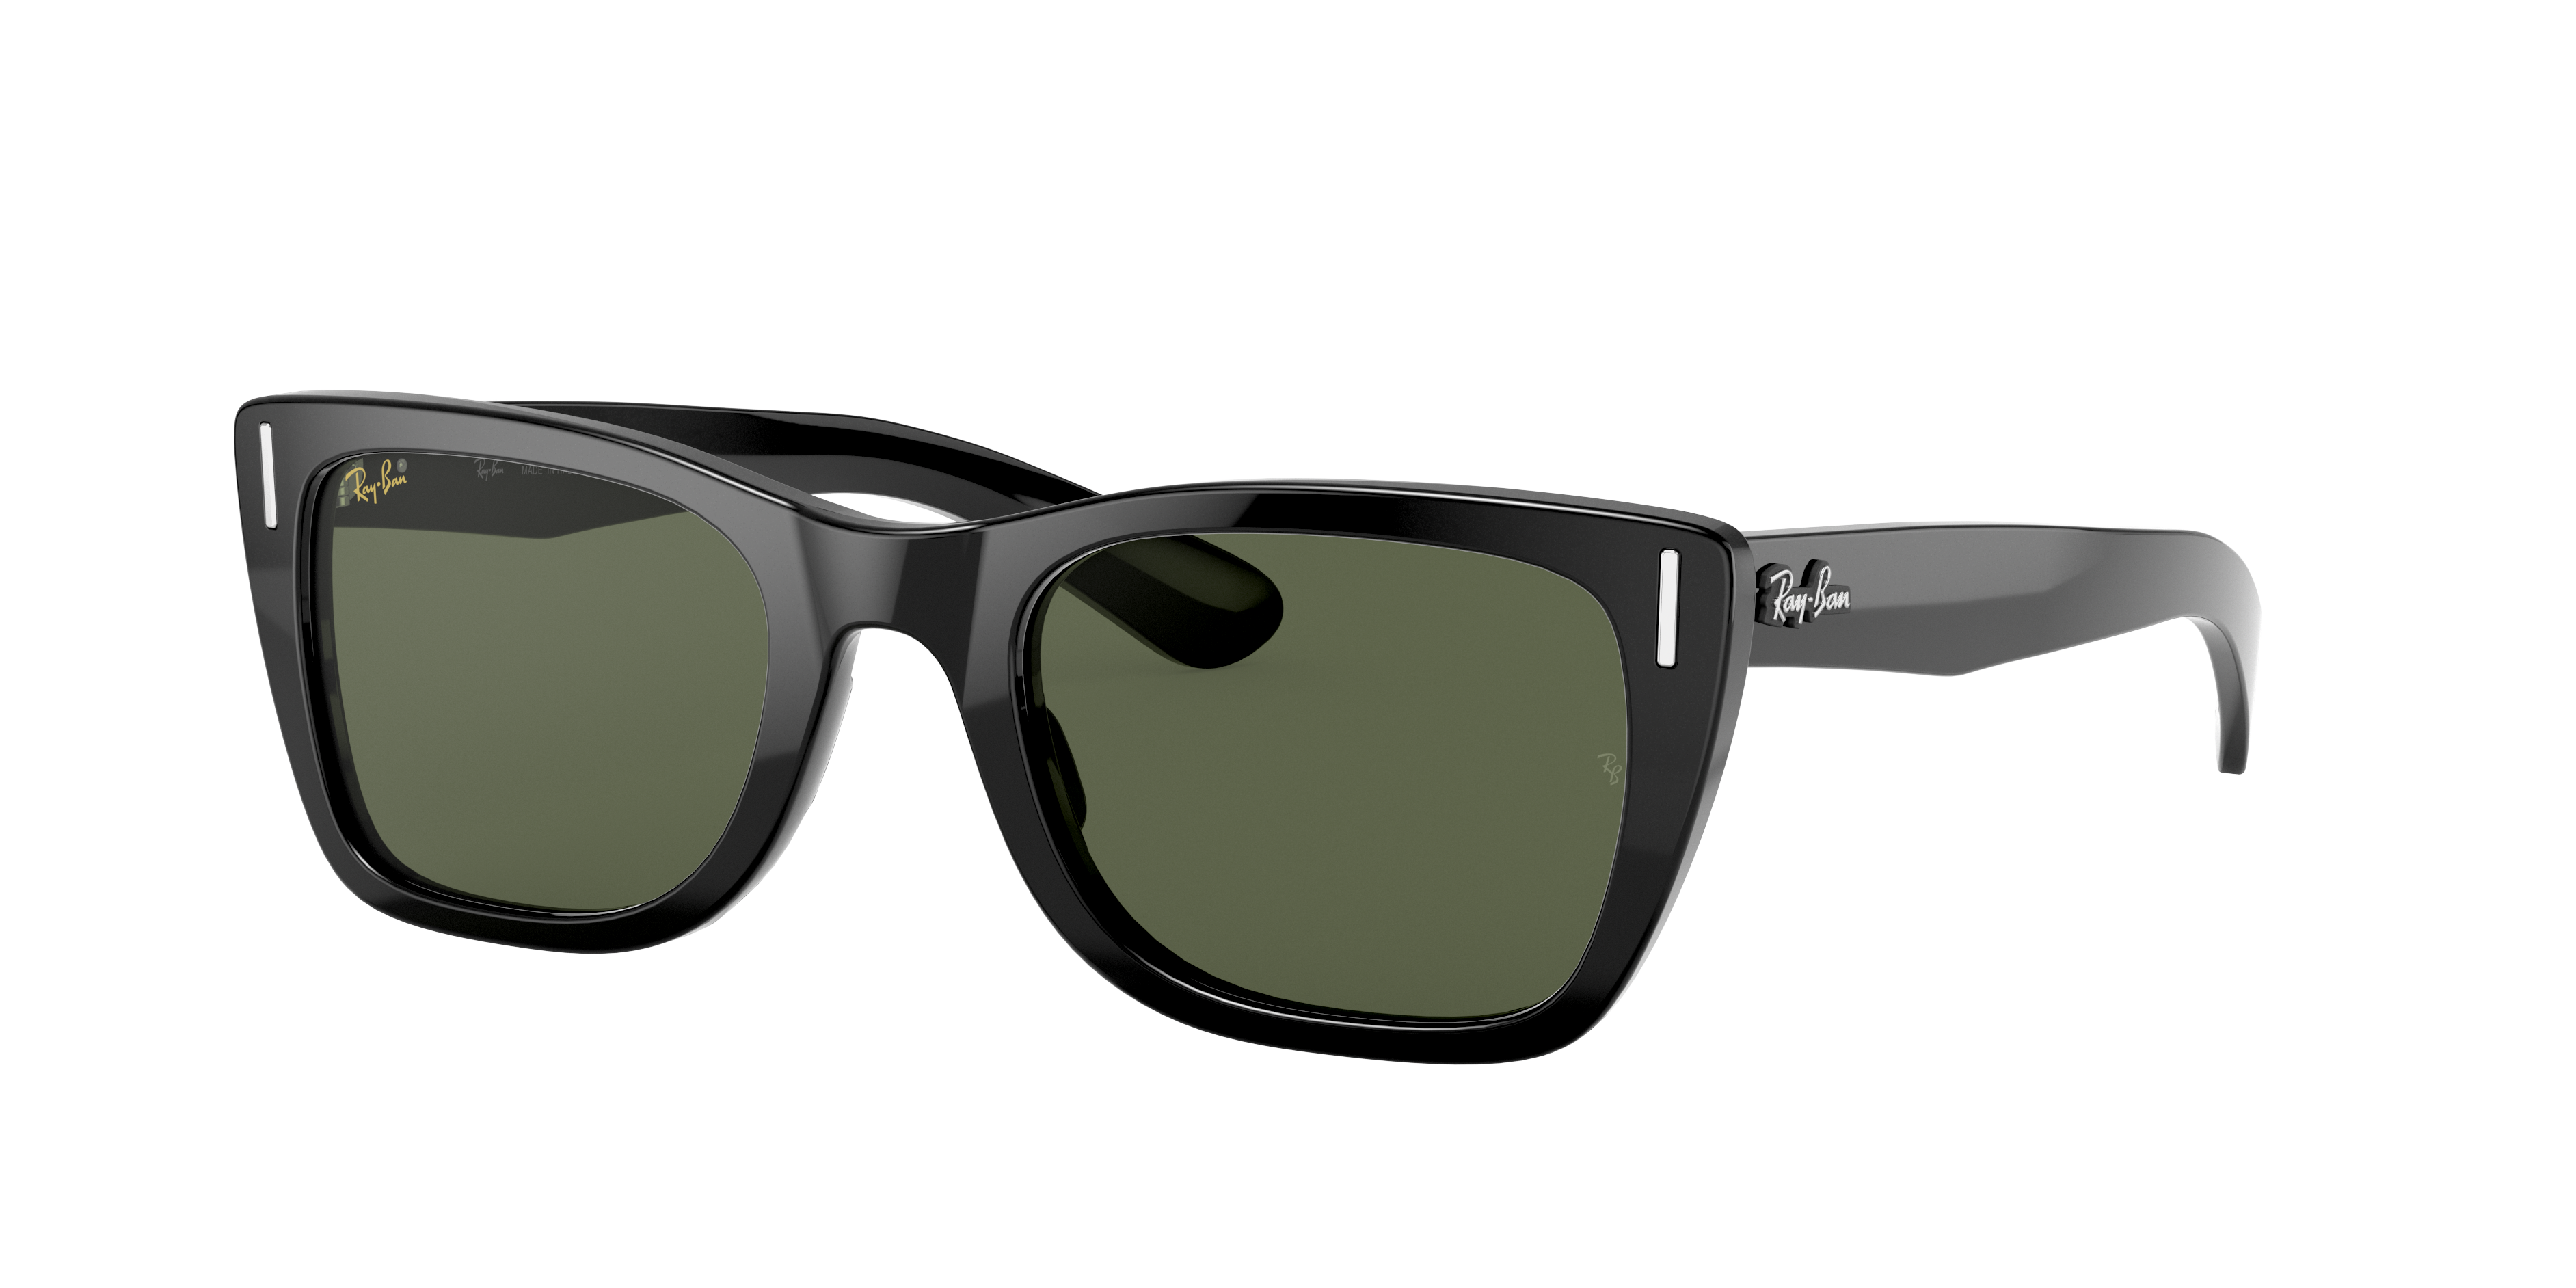 Models Of Ray Ban Sunglasses Top Sellers, 52% OFF | www 